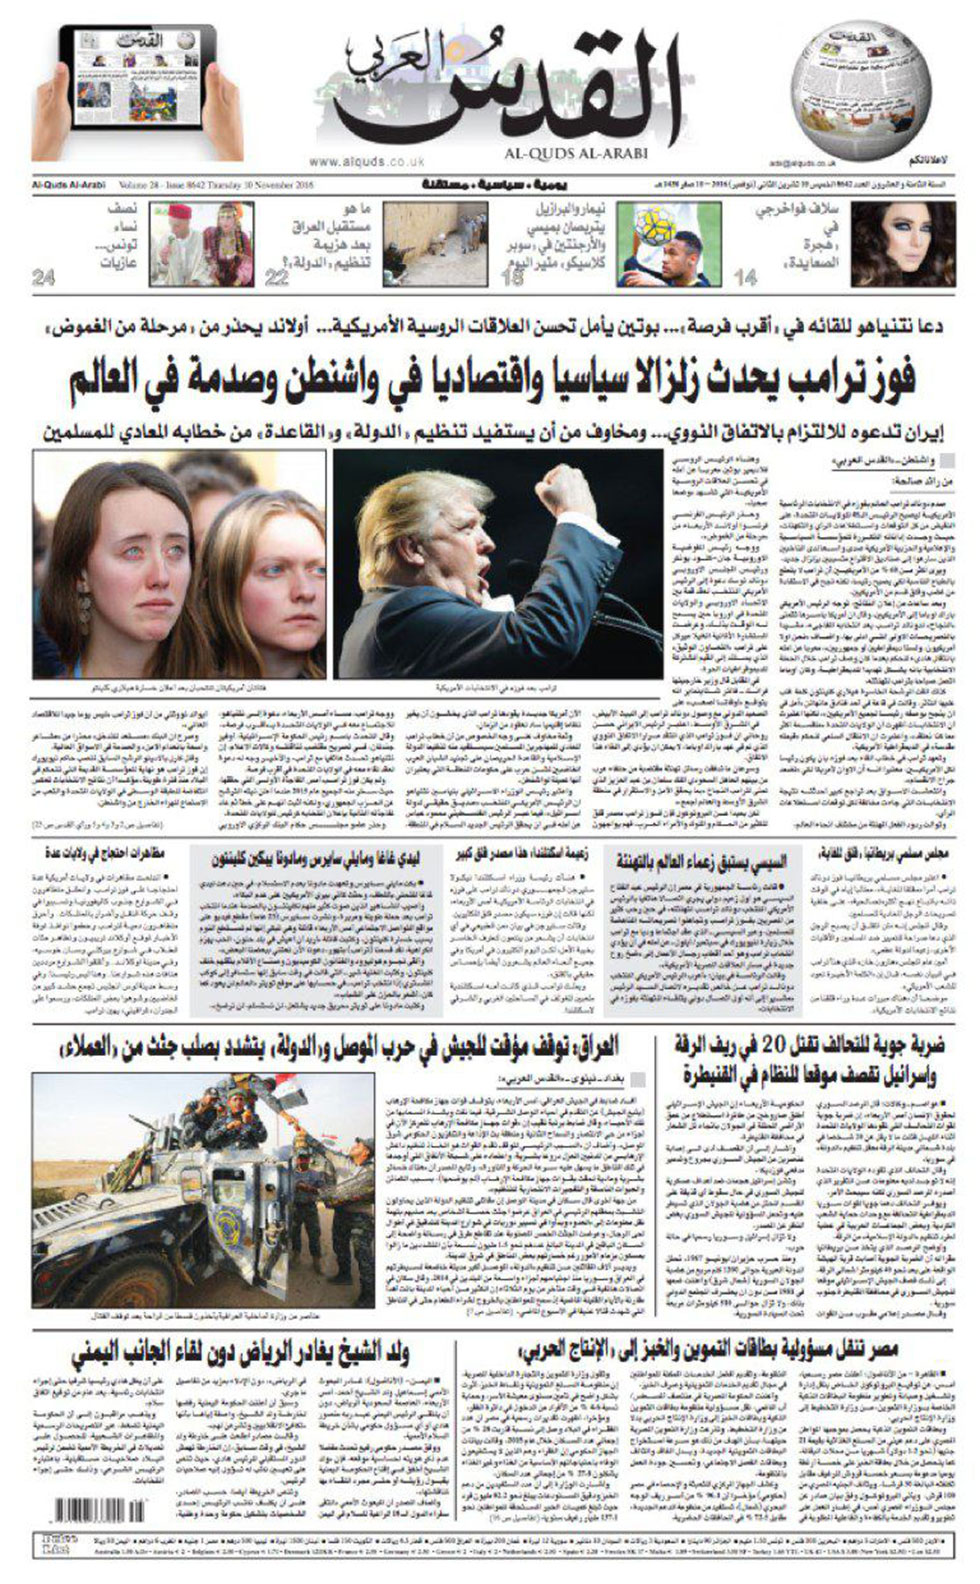 Al-Quds Al-Arabi front page: Trump's victory has brought about a political and economic earthquake in Washington, and shocked the world